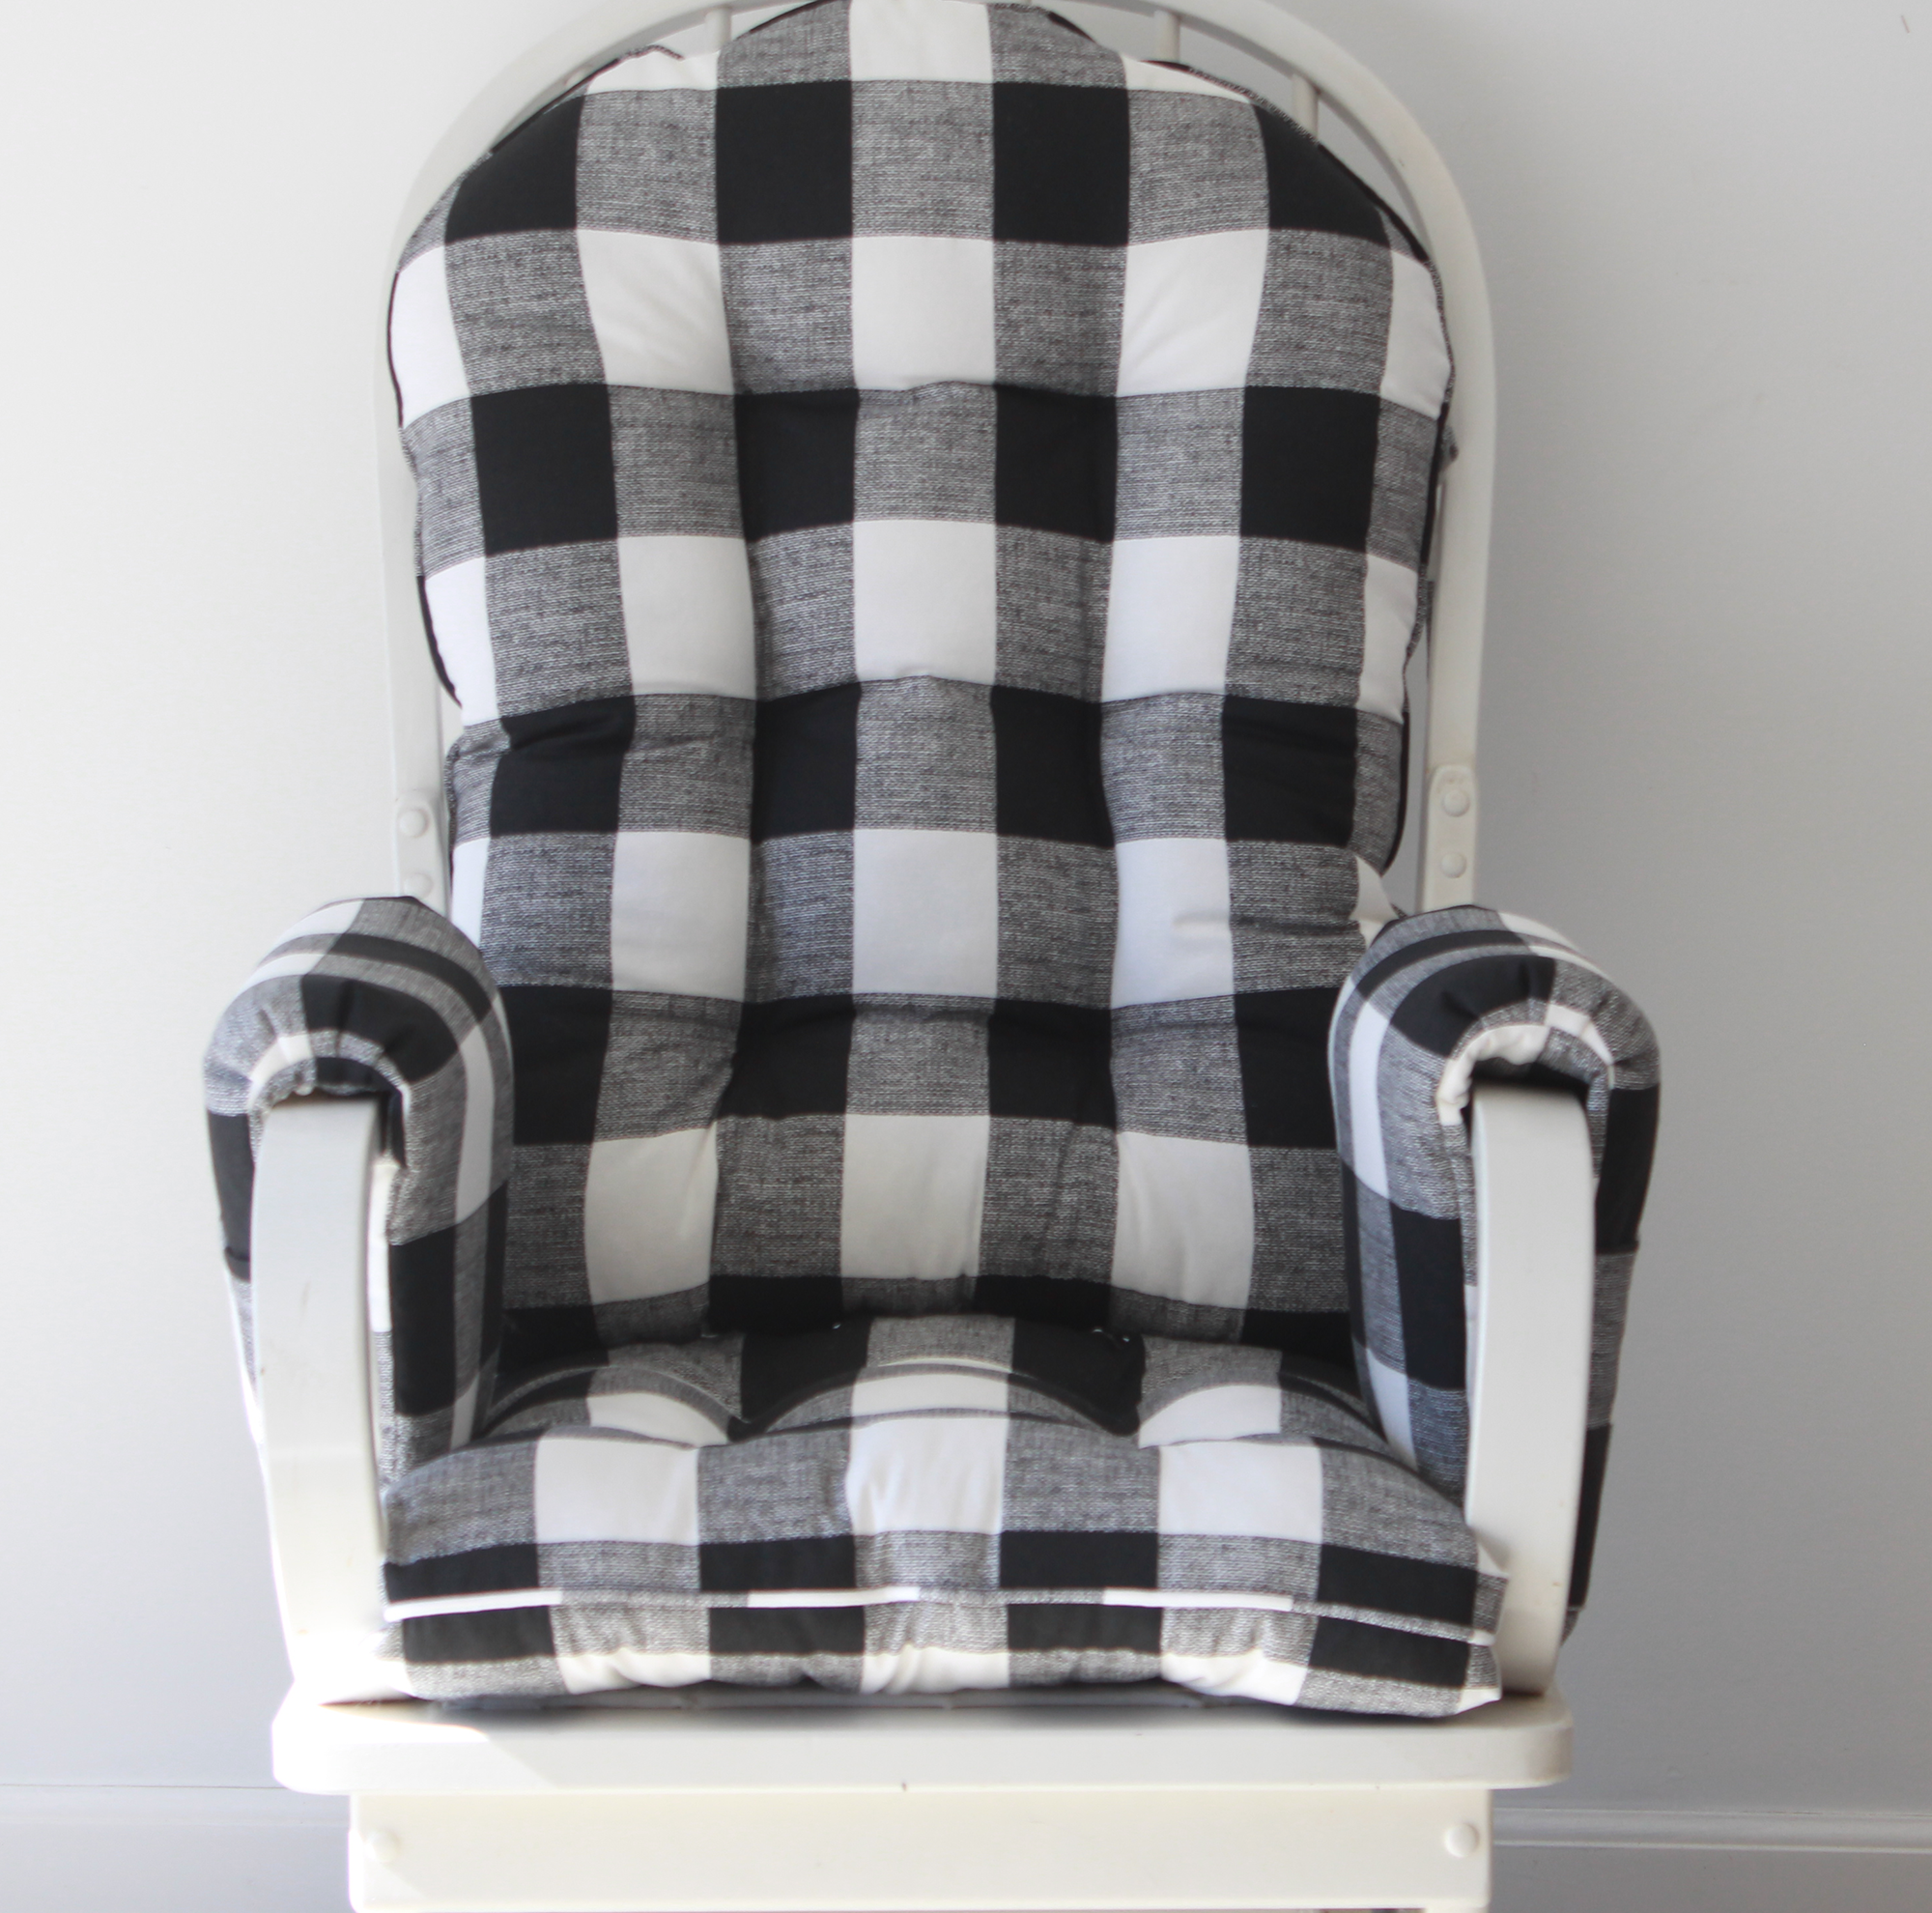 Glider replacement cushions with arm rest covers in black and white buffalo plaid